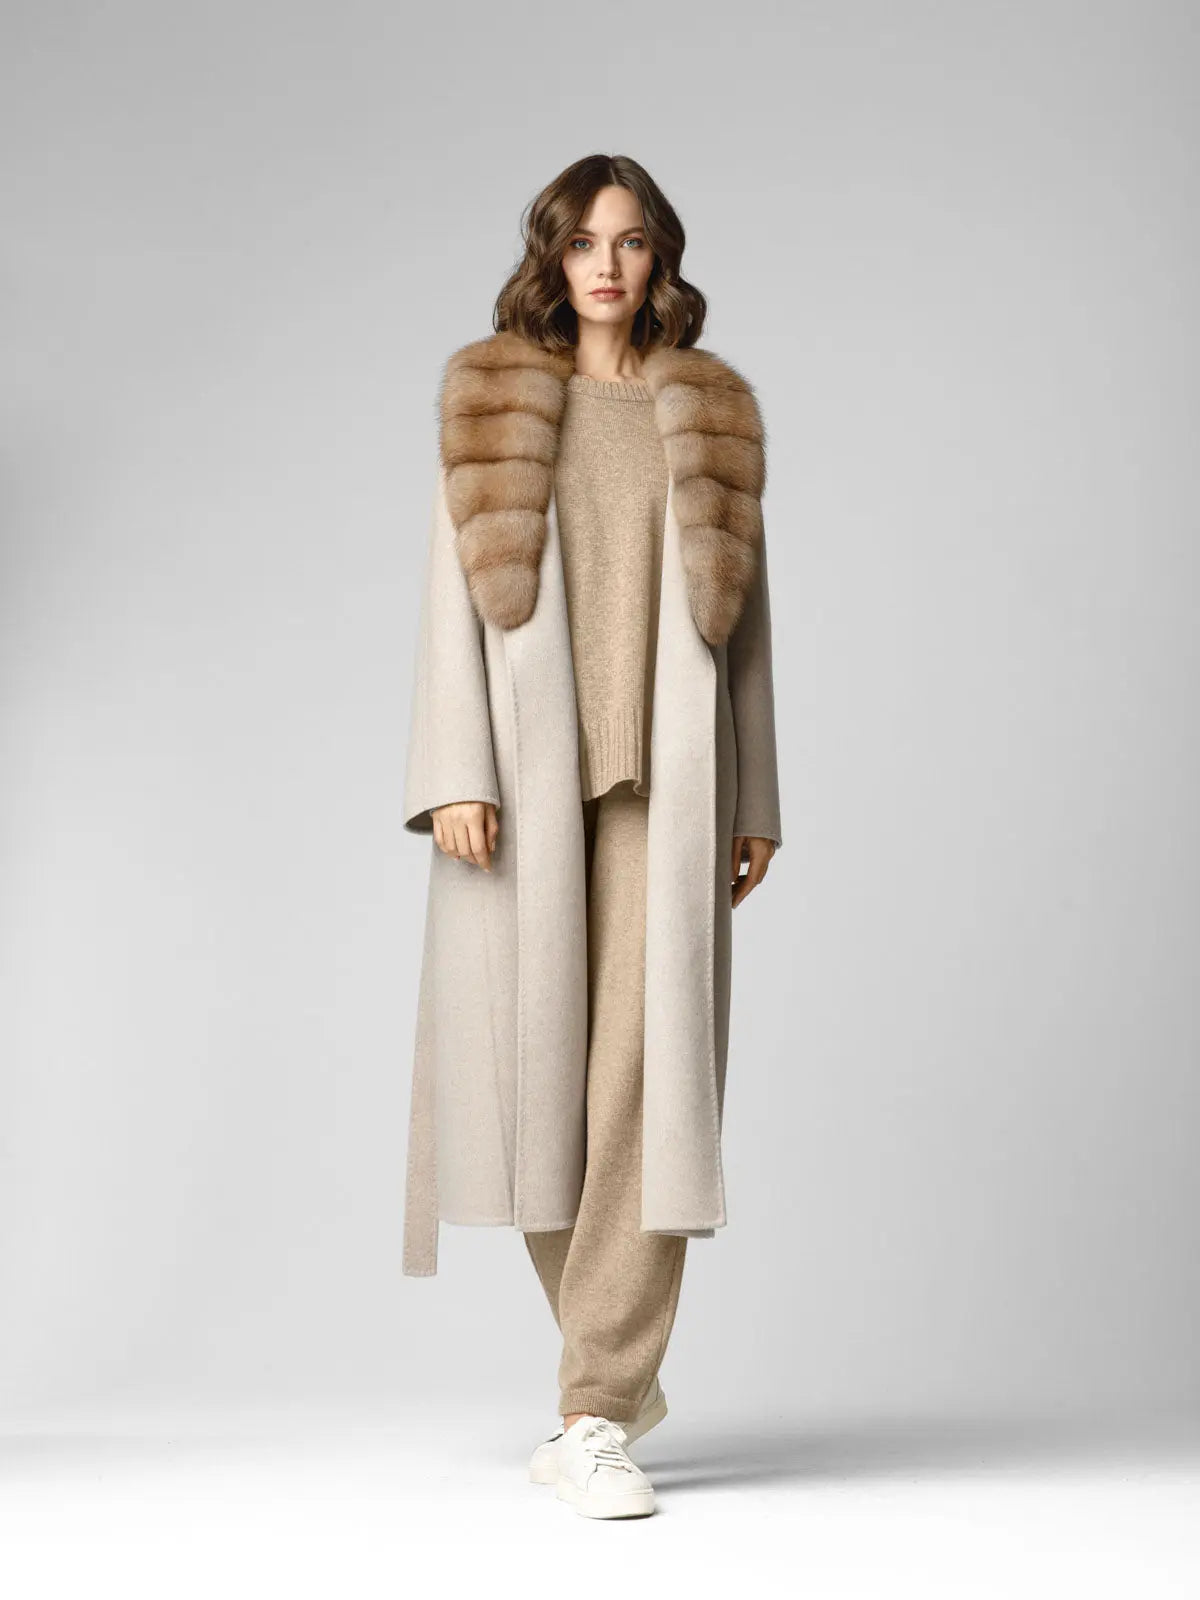 Marten cashmere coat with shawl collar